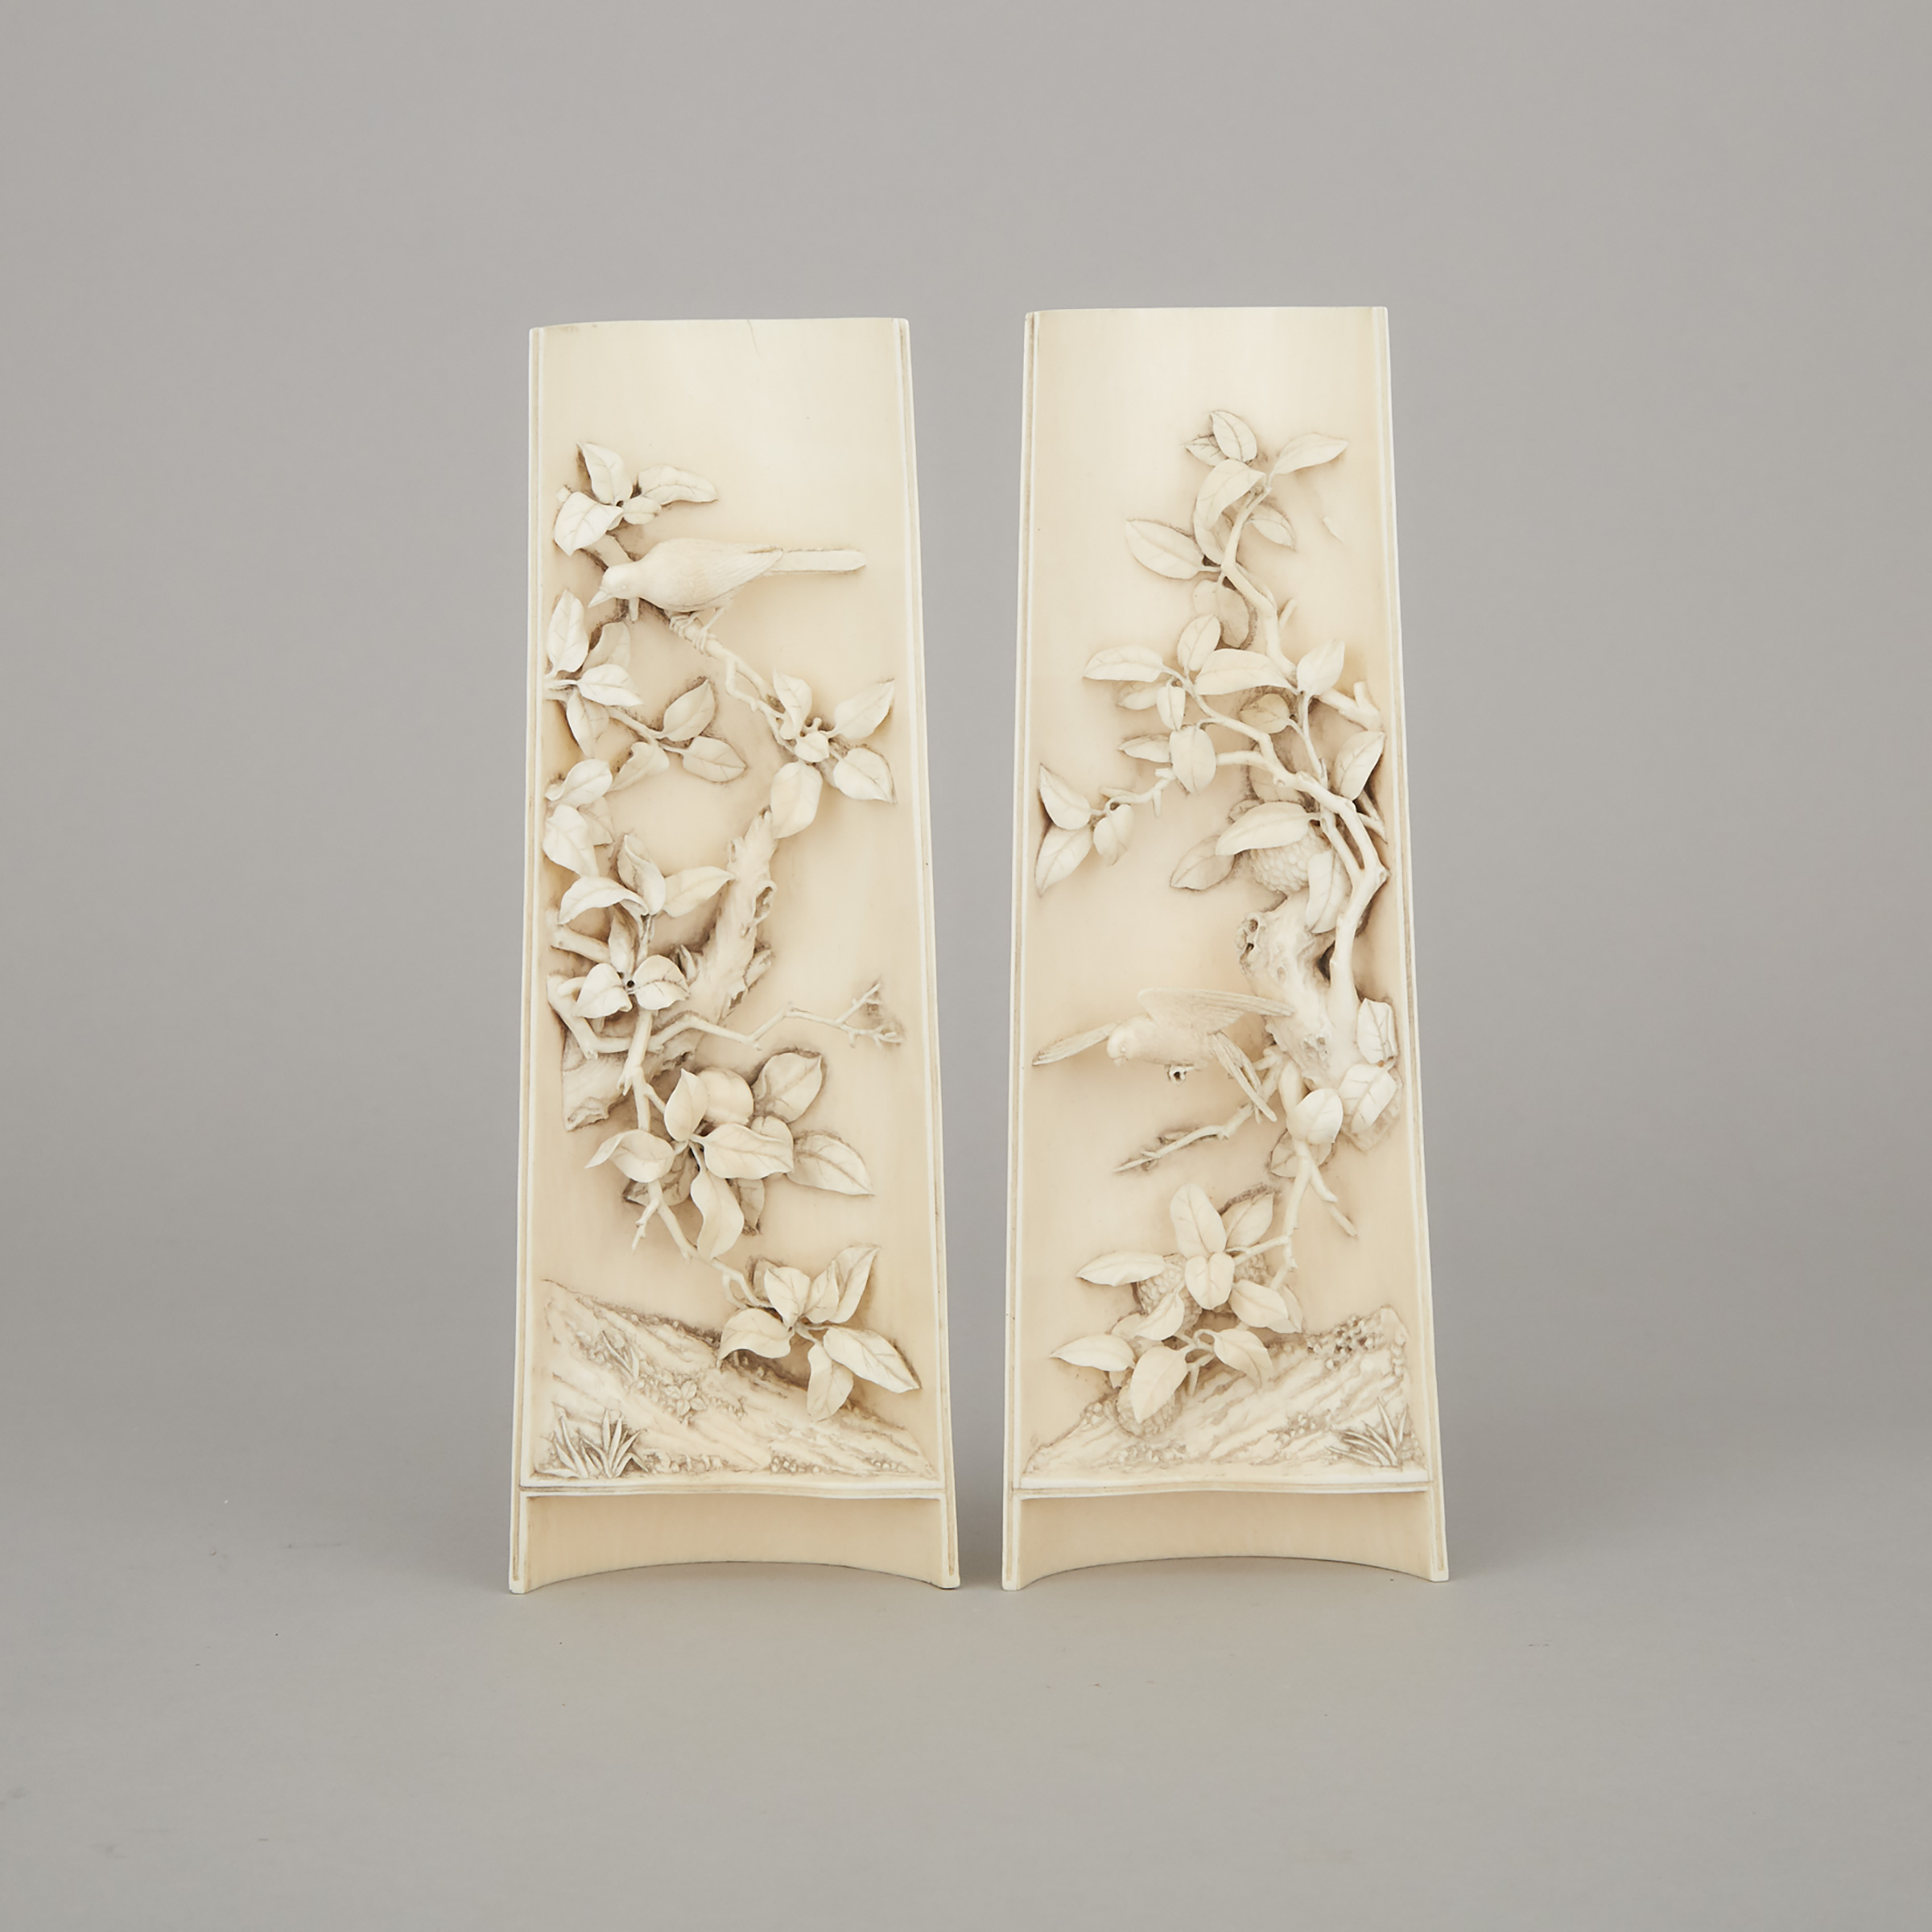 A Pair of Ivory Carved Wrist Rests with Birds, Circa 1900